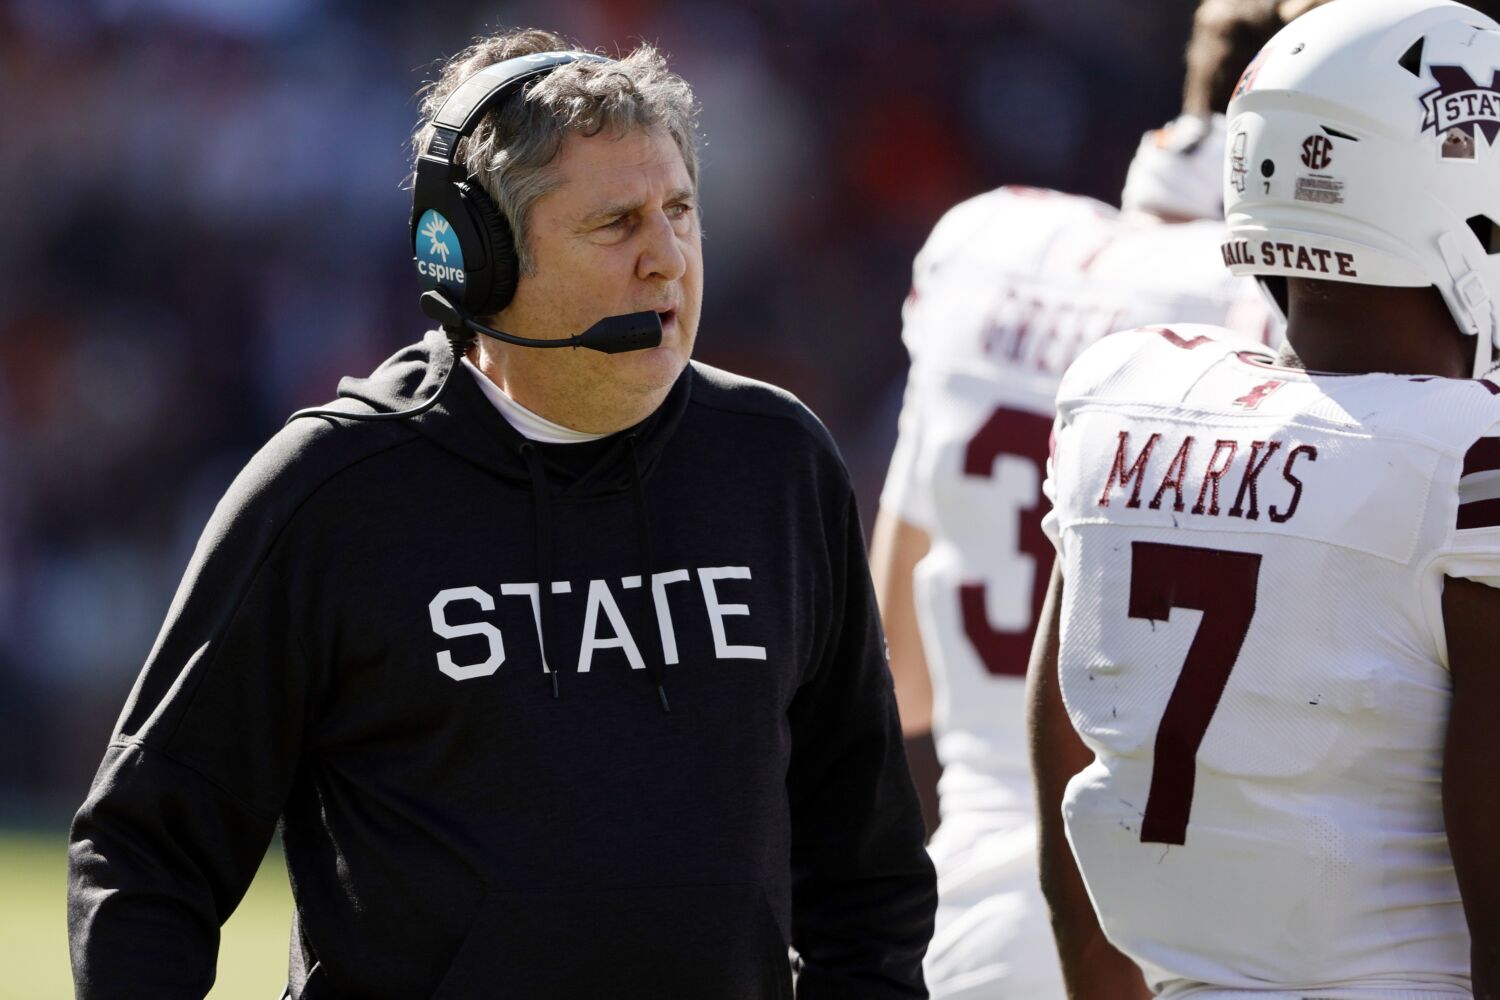 Mike Leach's influence extends deeply among his CFP title game 'disciples'